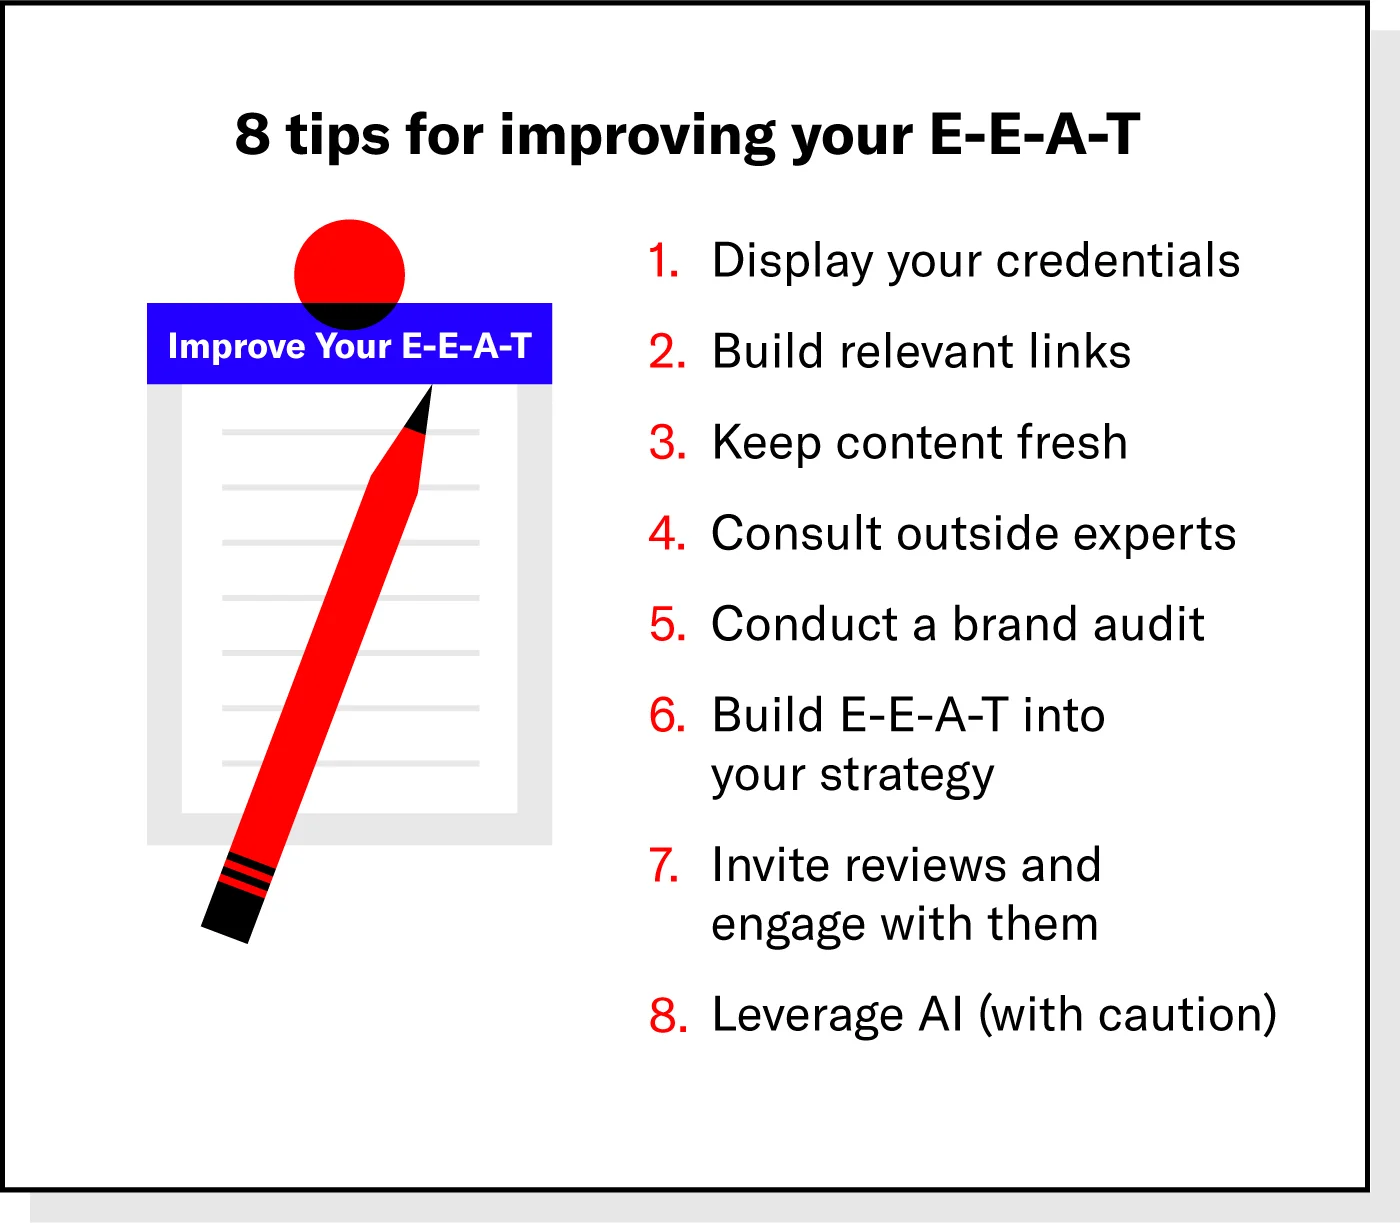 List of seven tips for improving E-E-A-T next to an illustrated pencil and notepad